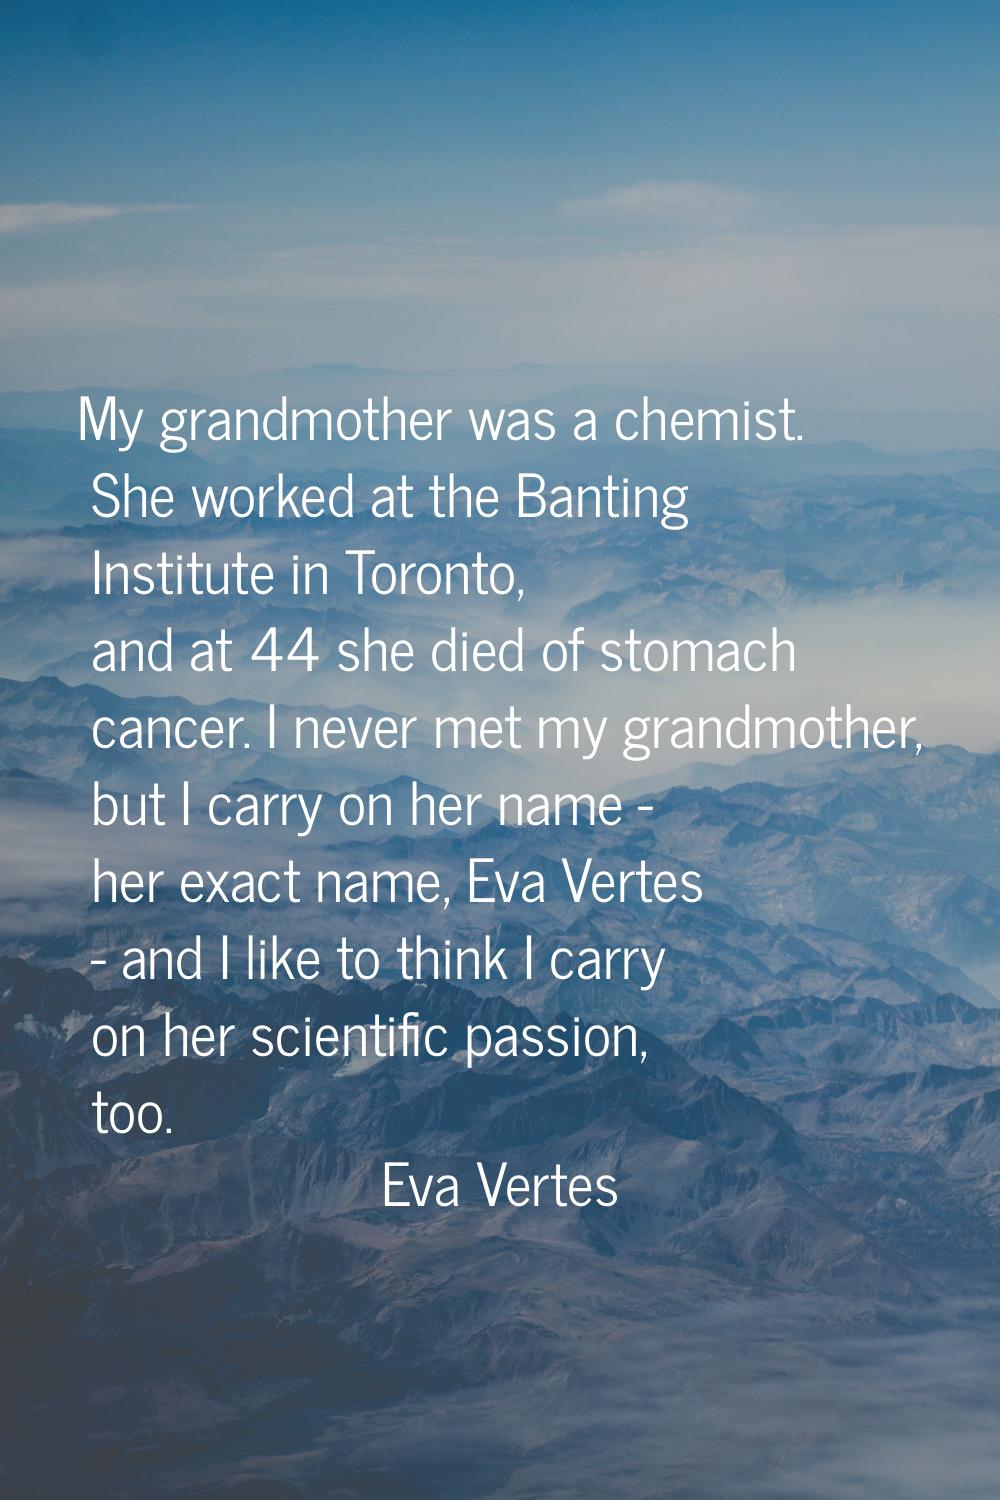 My grandmother was a chemist. She worked at the Banting Institute in Toronto, and at 44 she died of